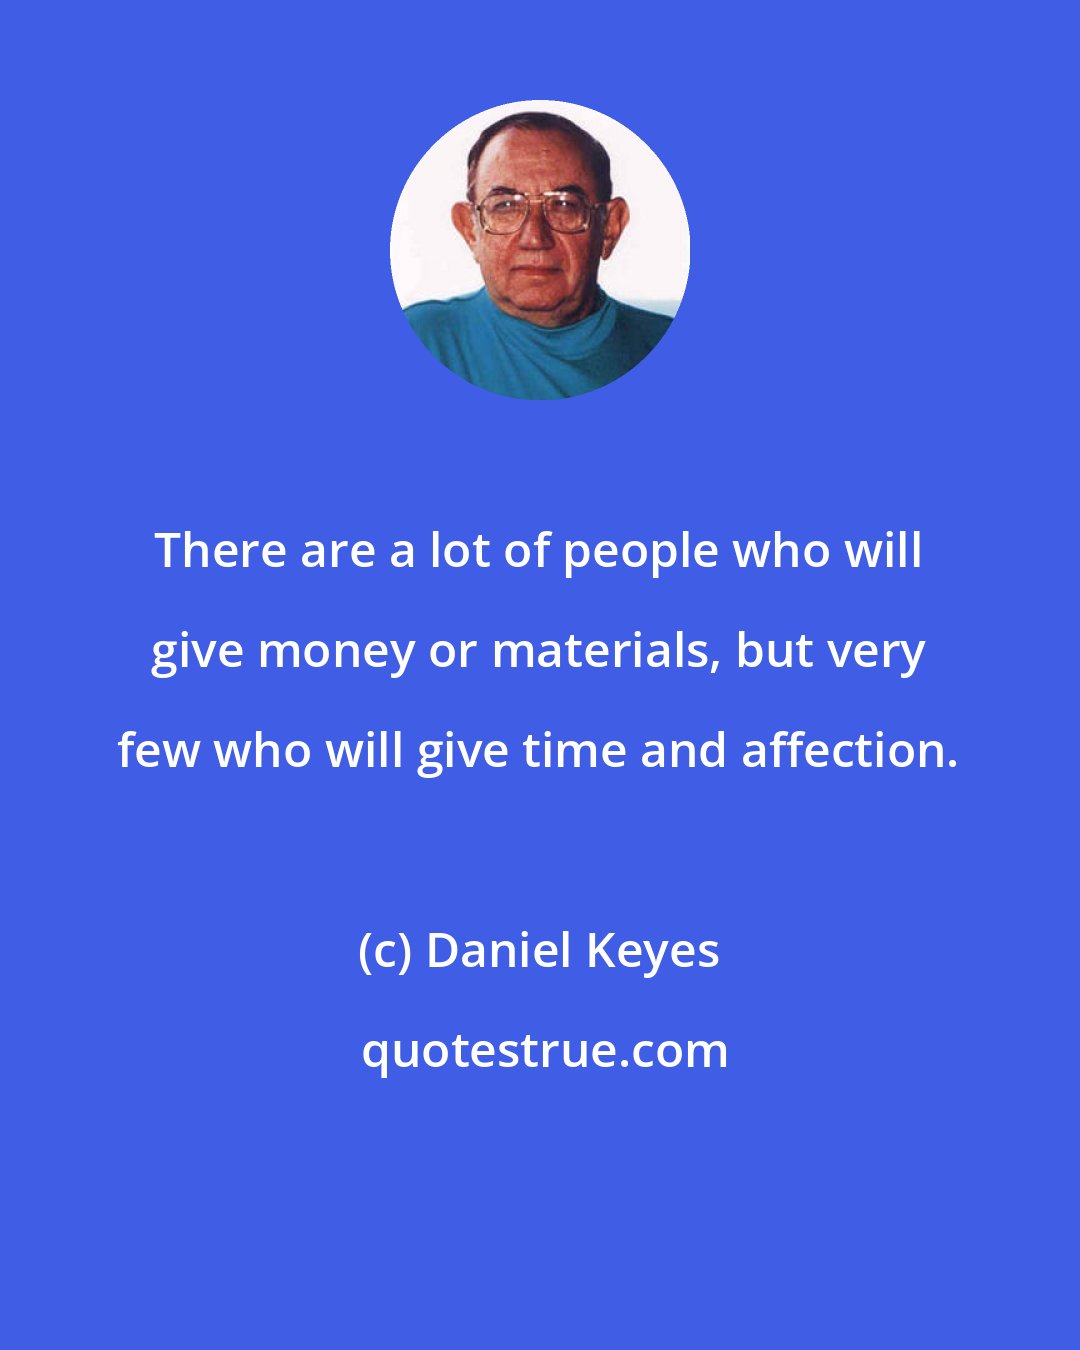 Daniel Keyes: There are a lot of people who will give money or materials, but very few who will give time and affection.